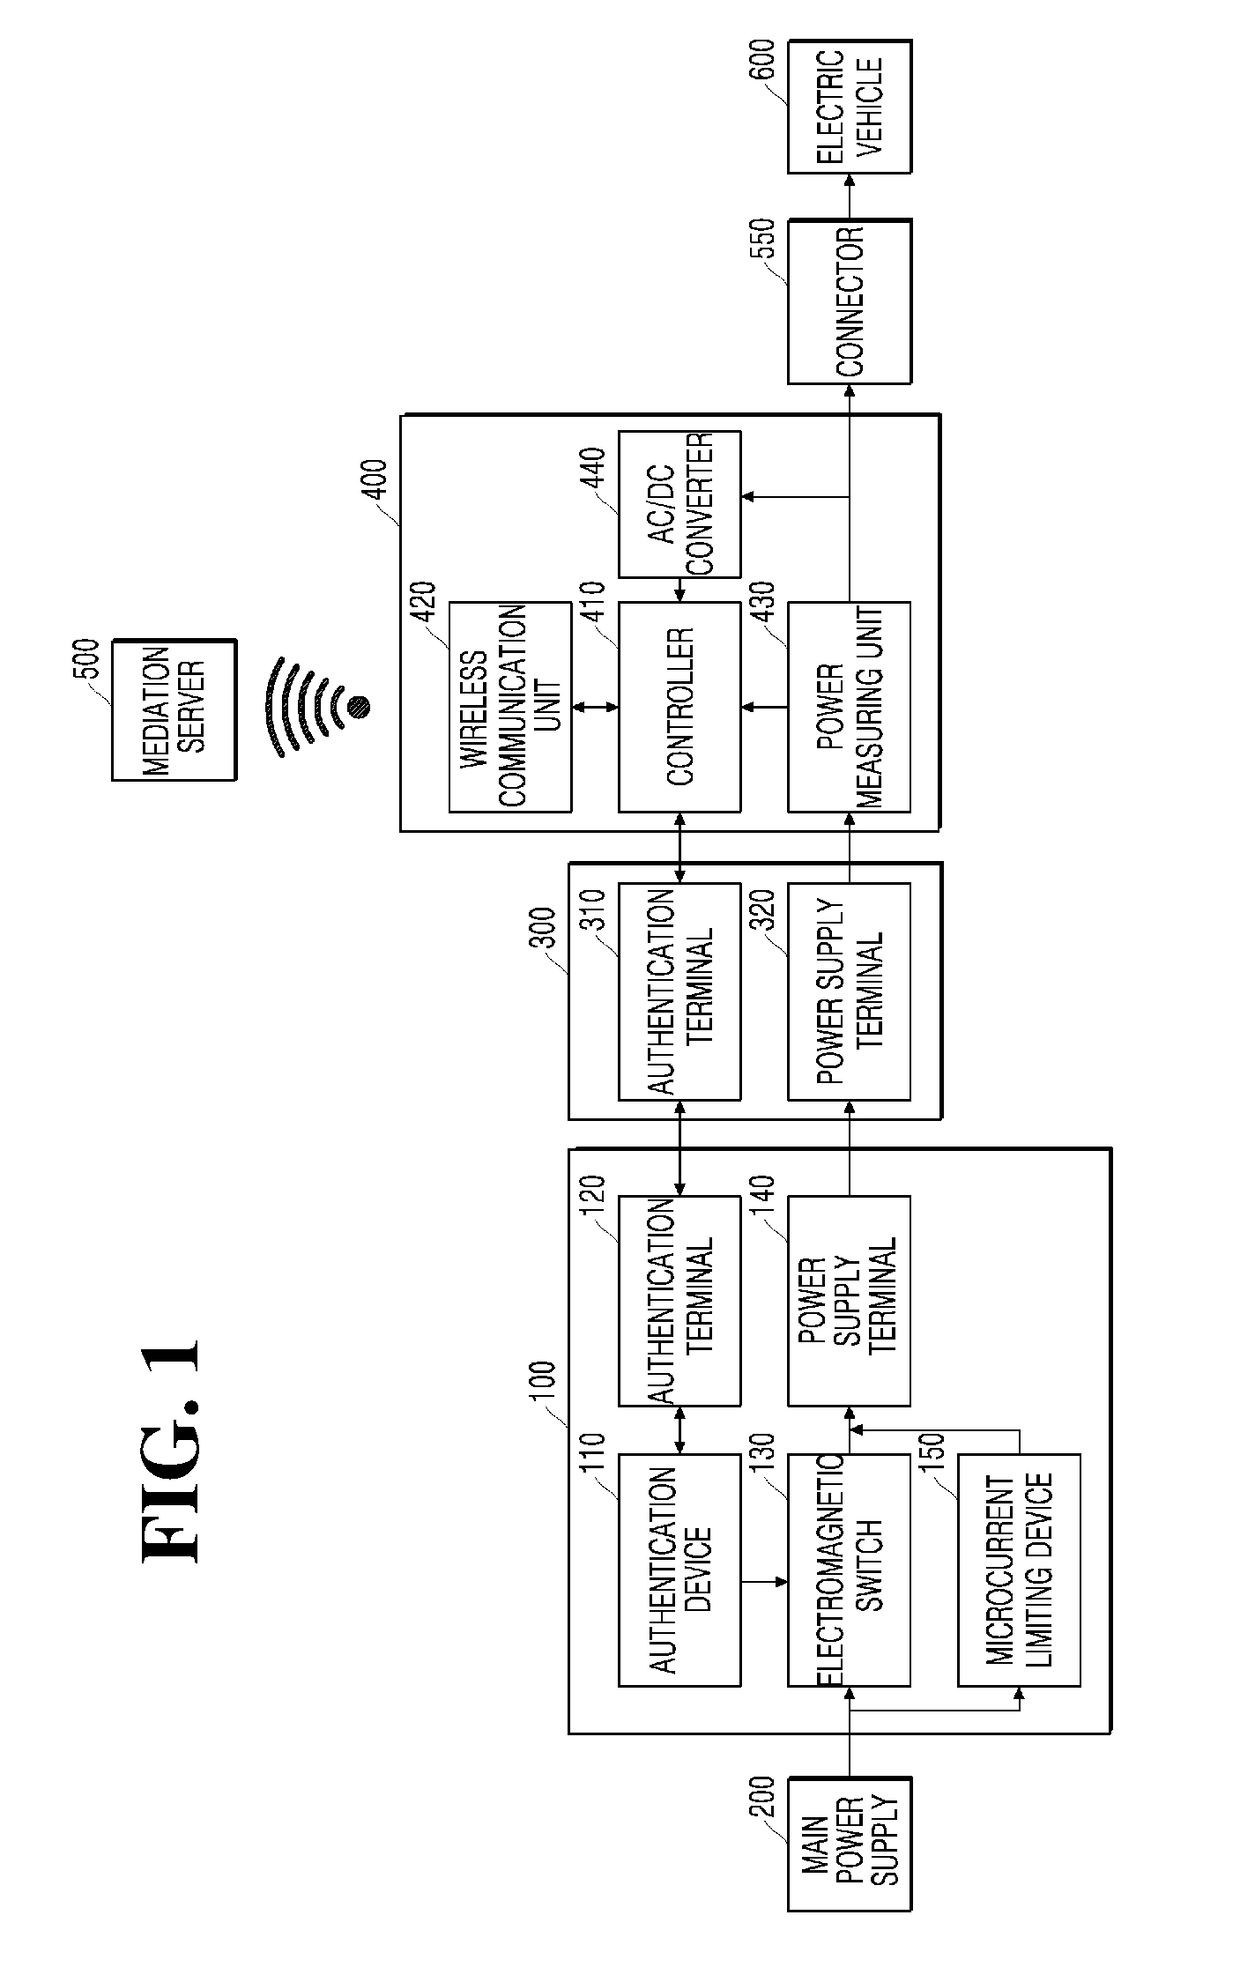 User authenticating electrical outlet or connector, power mediating module, and power consuming device